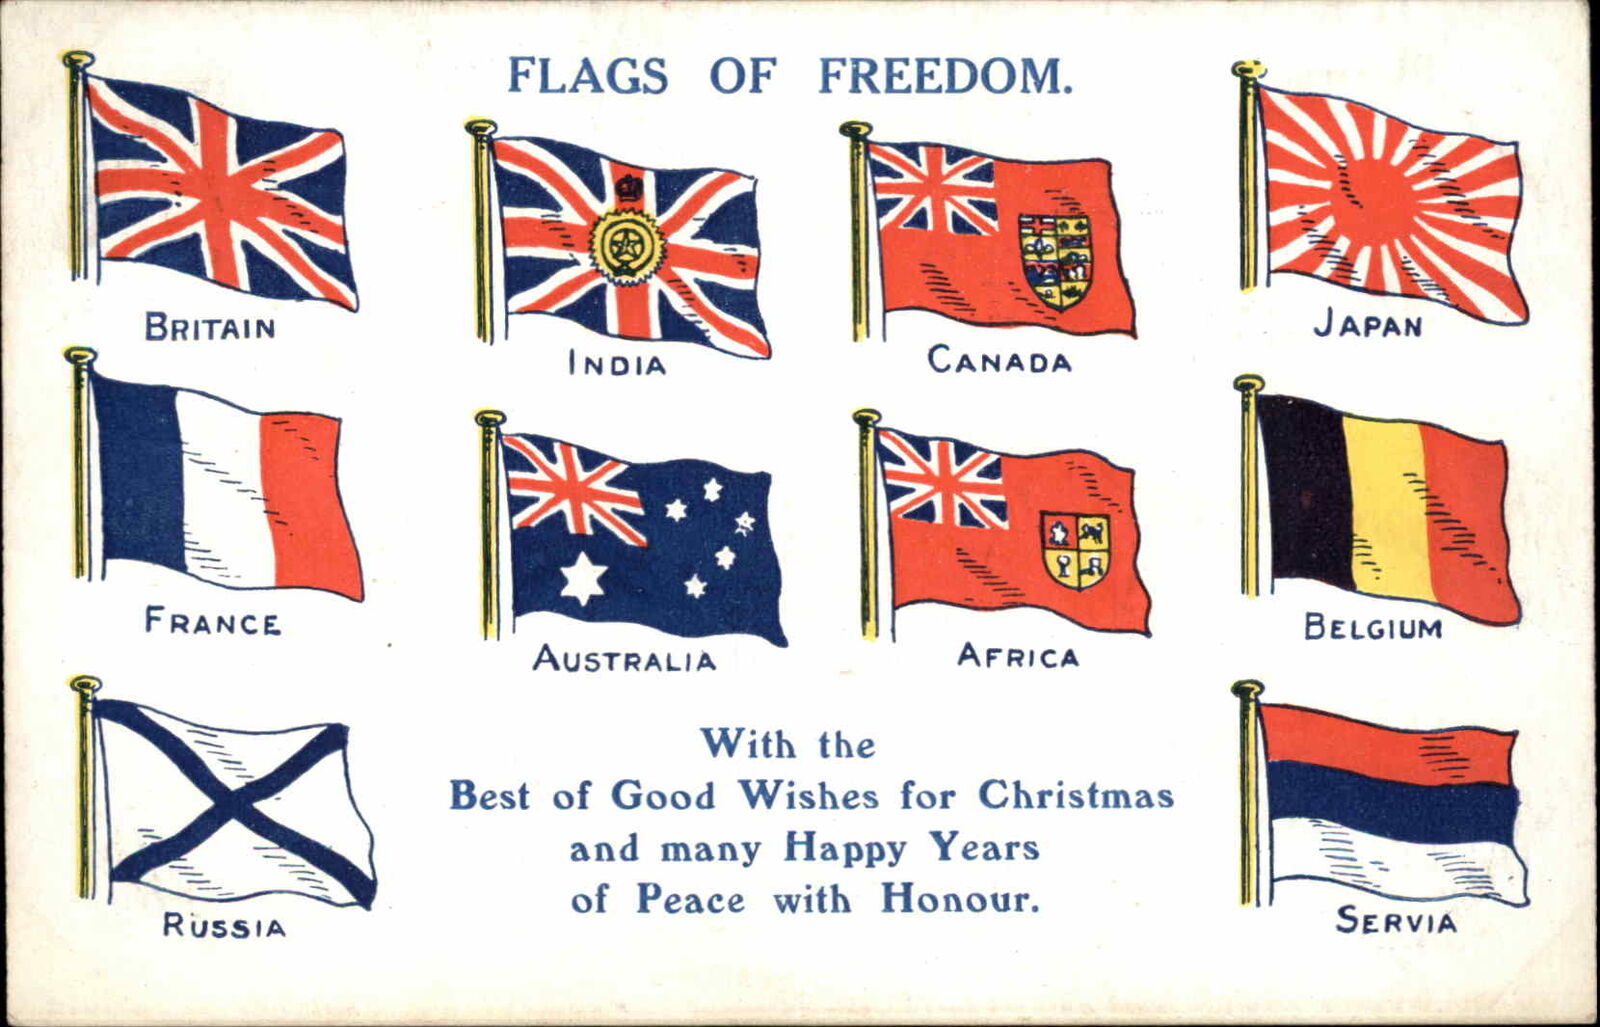 WWI Flags of Freedom ALLIED FLAGS Patriotic Postcard